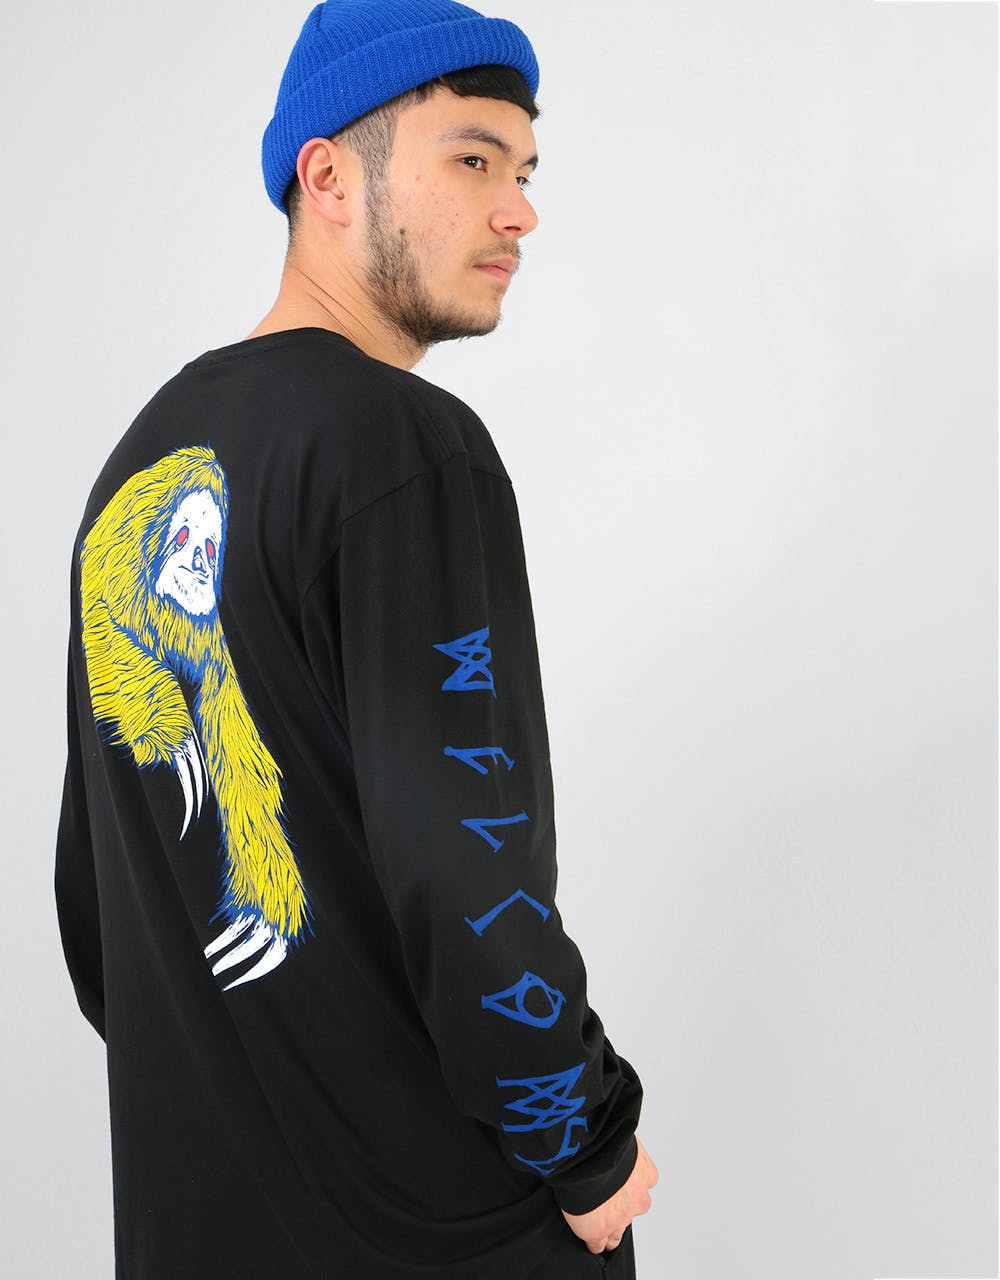 Welcome Sloth L/S T-Shirt - Black/Blue/Yellow